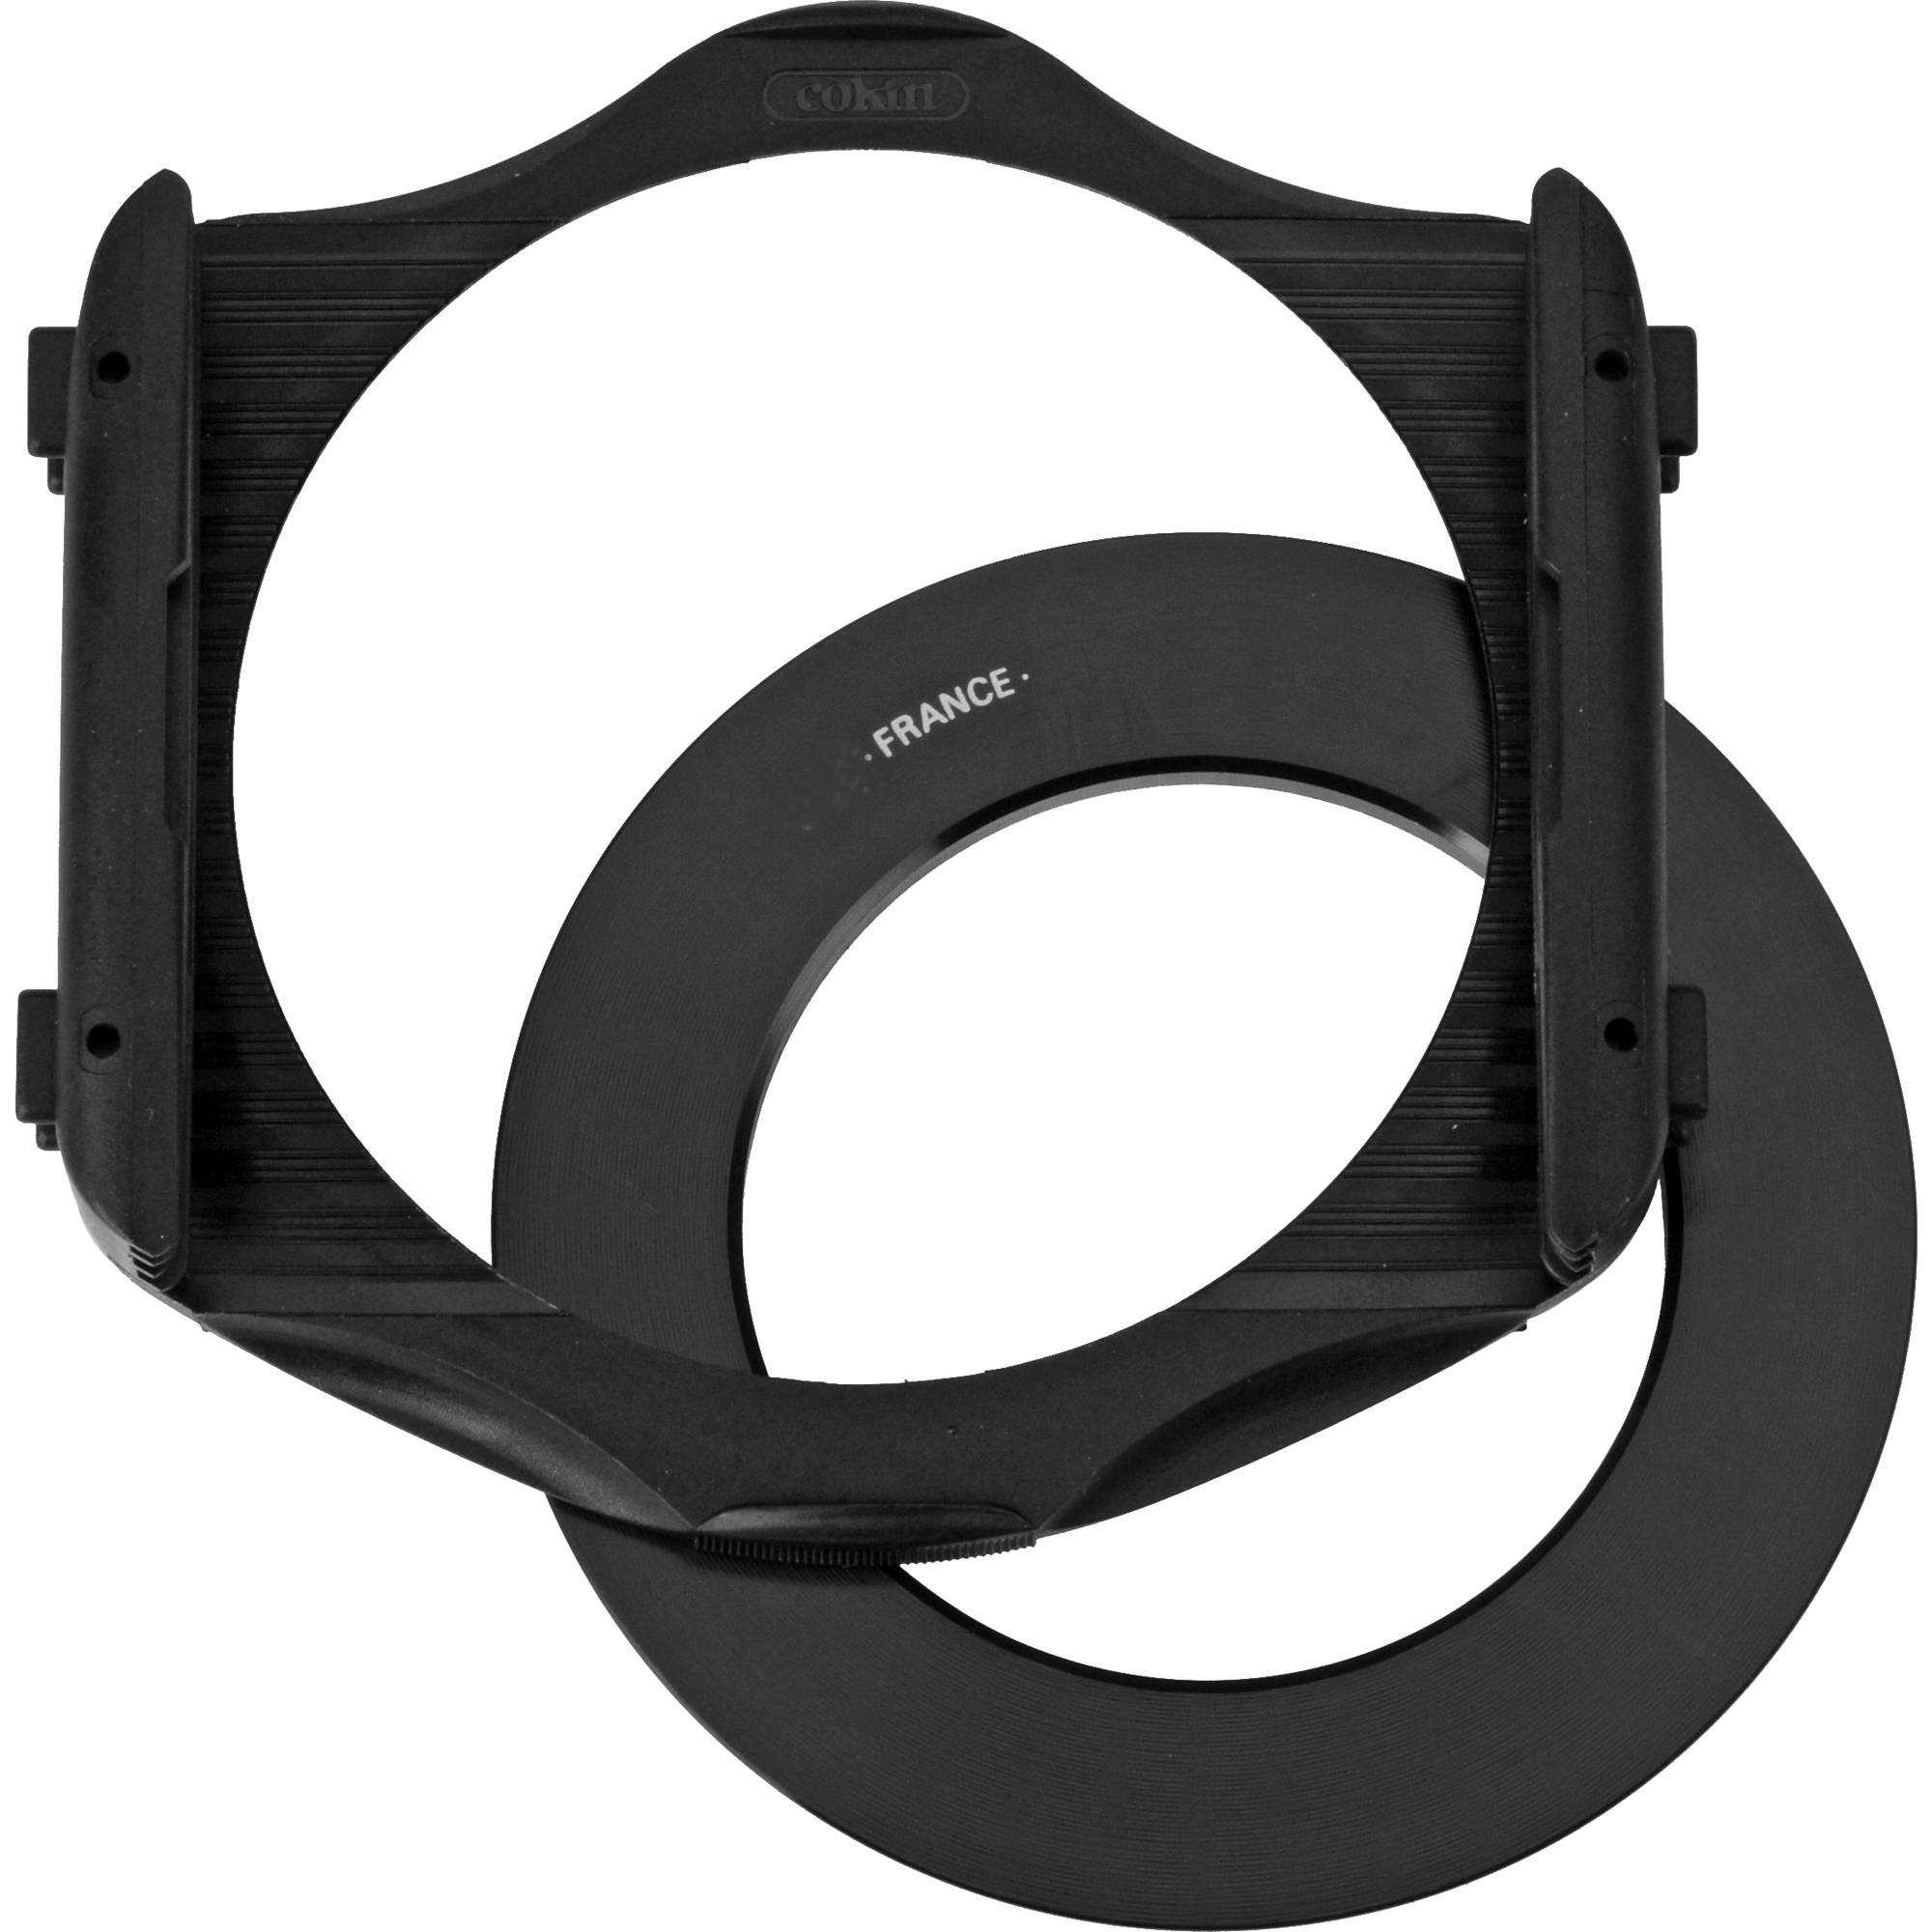 Cokin P Series Filter Holder And 72mm Adapter Ring Kit Cbp40072 I am interested in buying the cokin p series gradual nd filter kit with holder, but it does not say for which lenses it is suitable. cokin p series filter holder and 72mm adapter ring kit